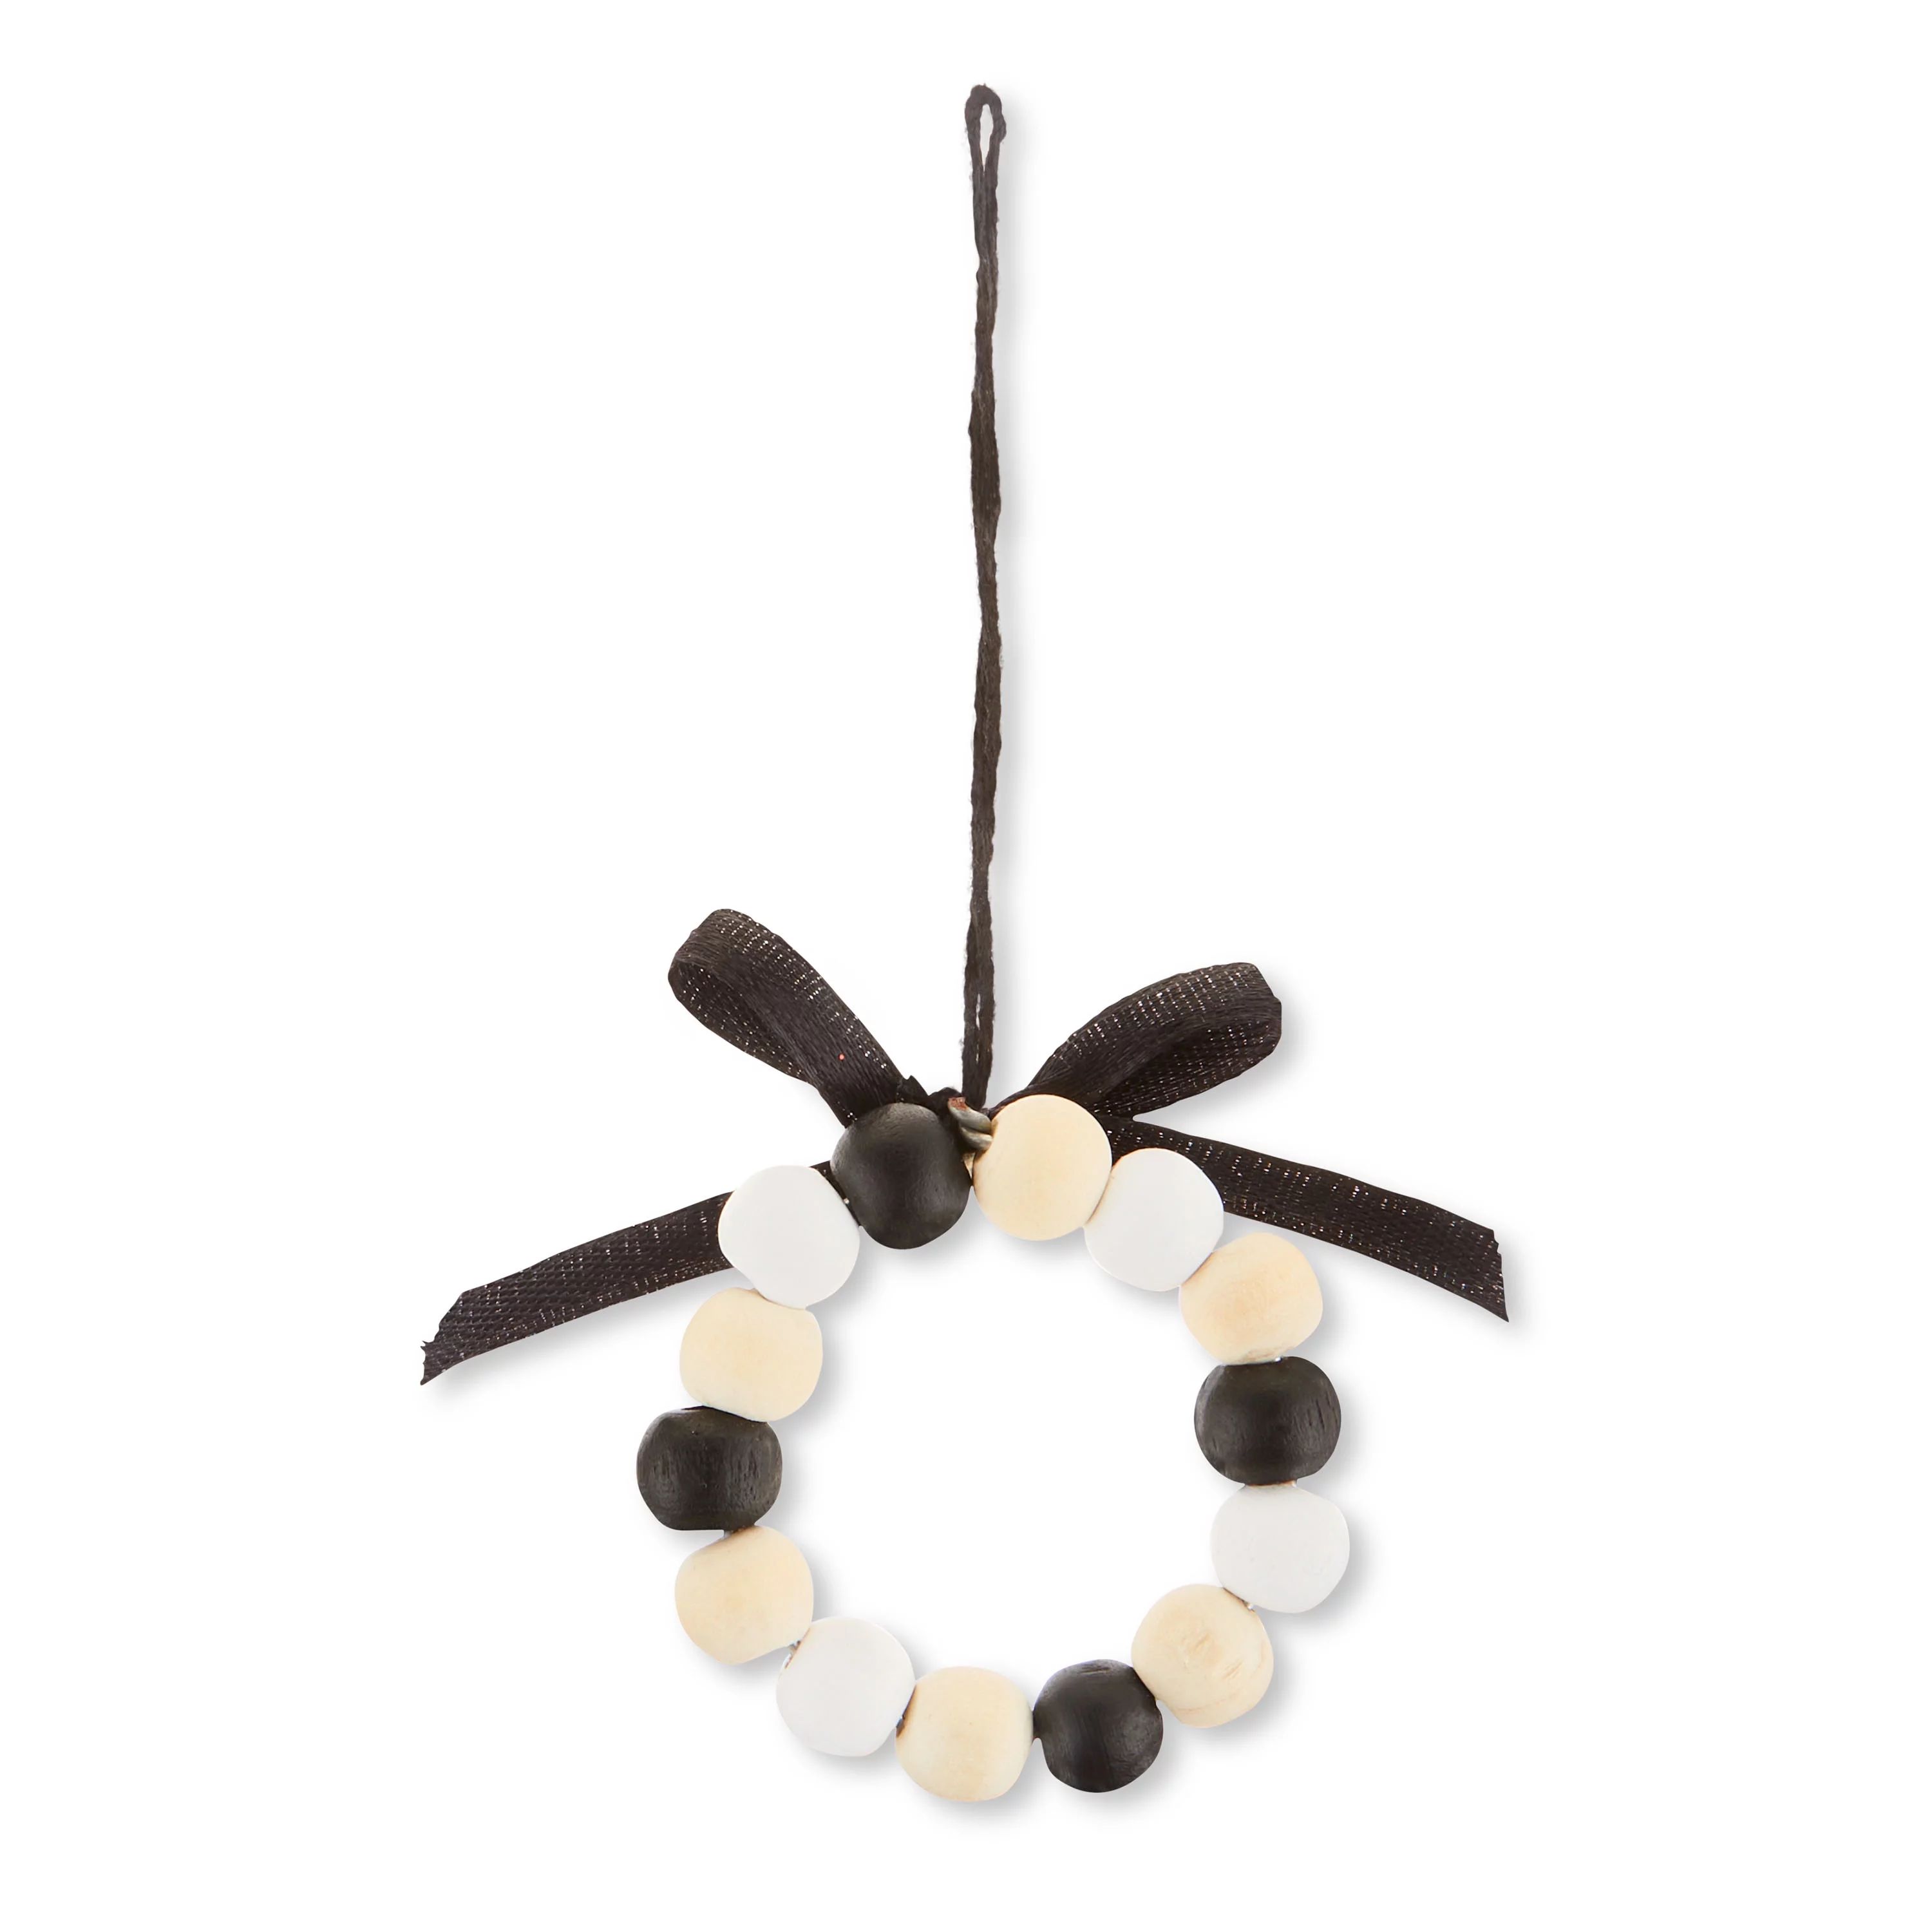 Mini Black & White Wooden Bead Wreath Christmas Ornaments, 4 Count, by Holiday Time | Walmart (US)